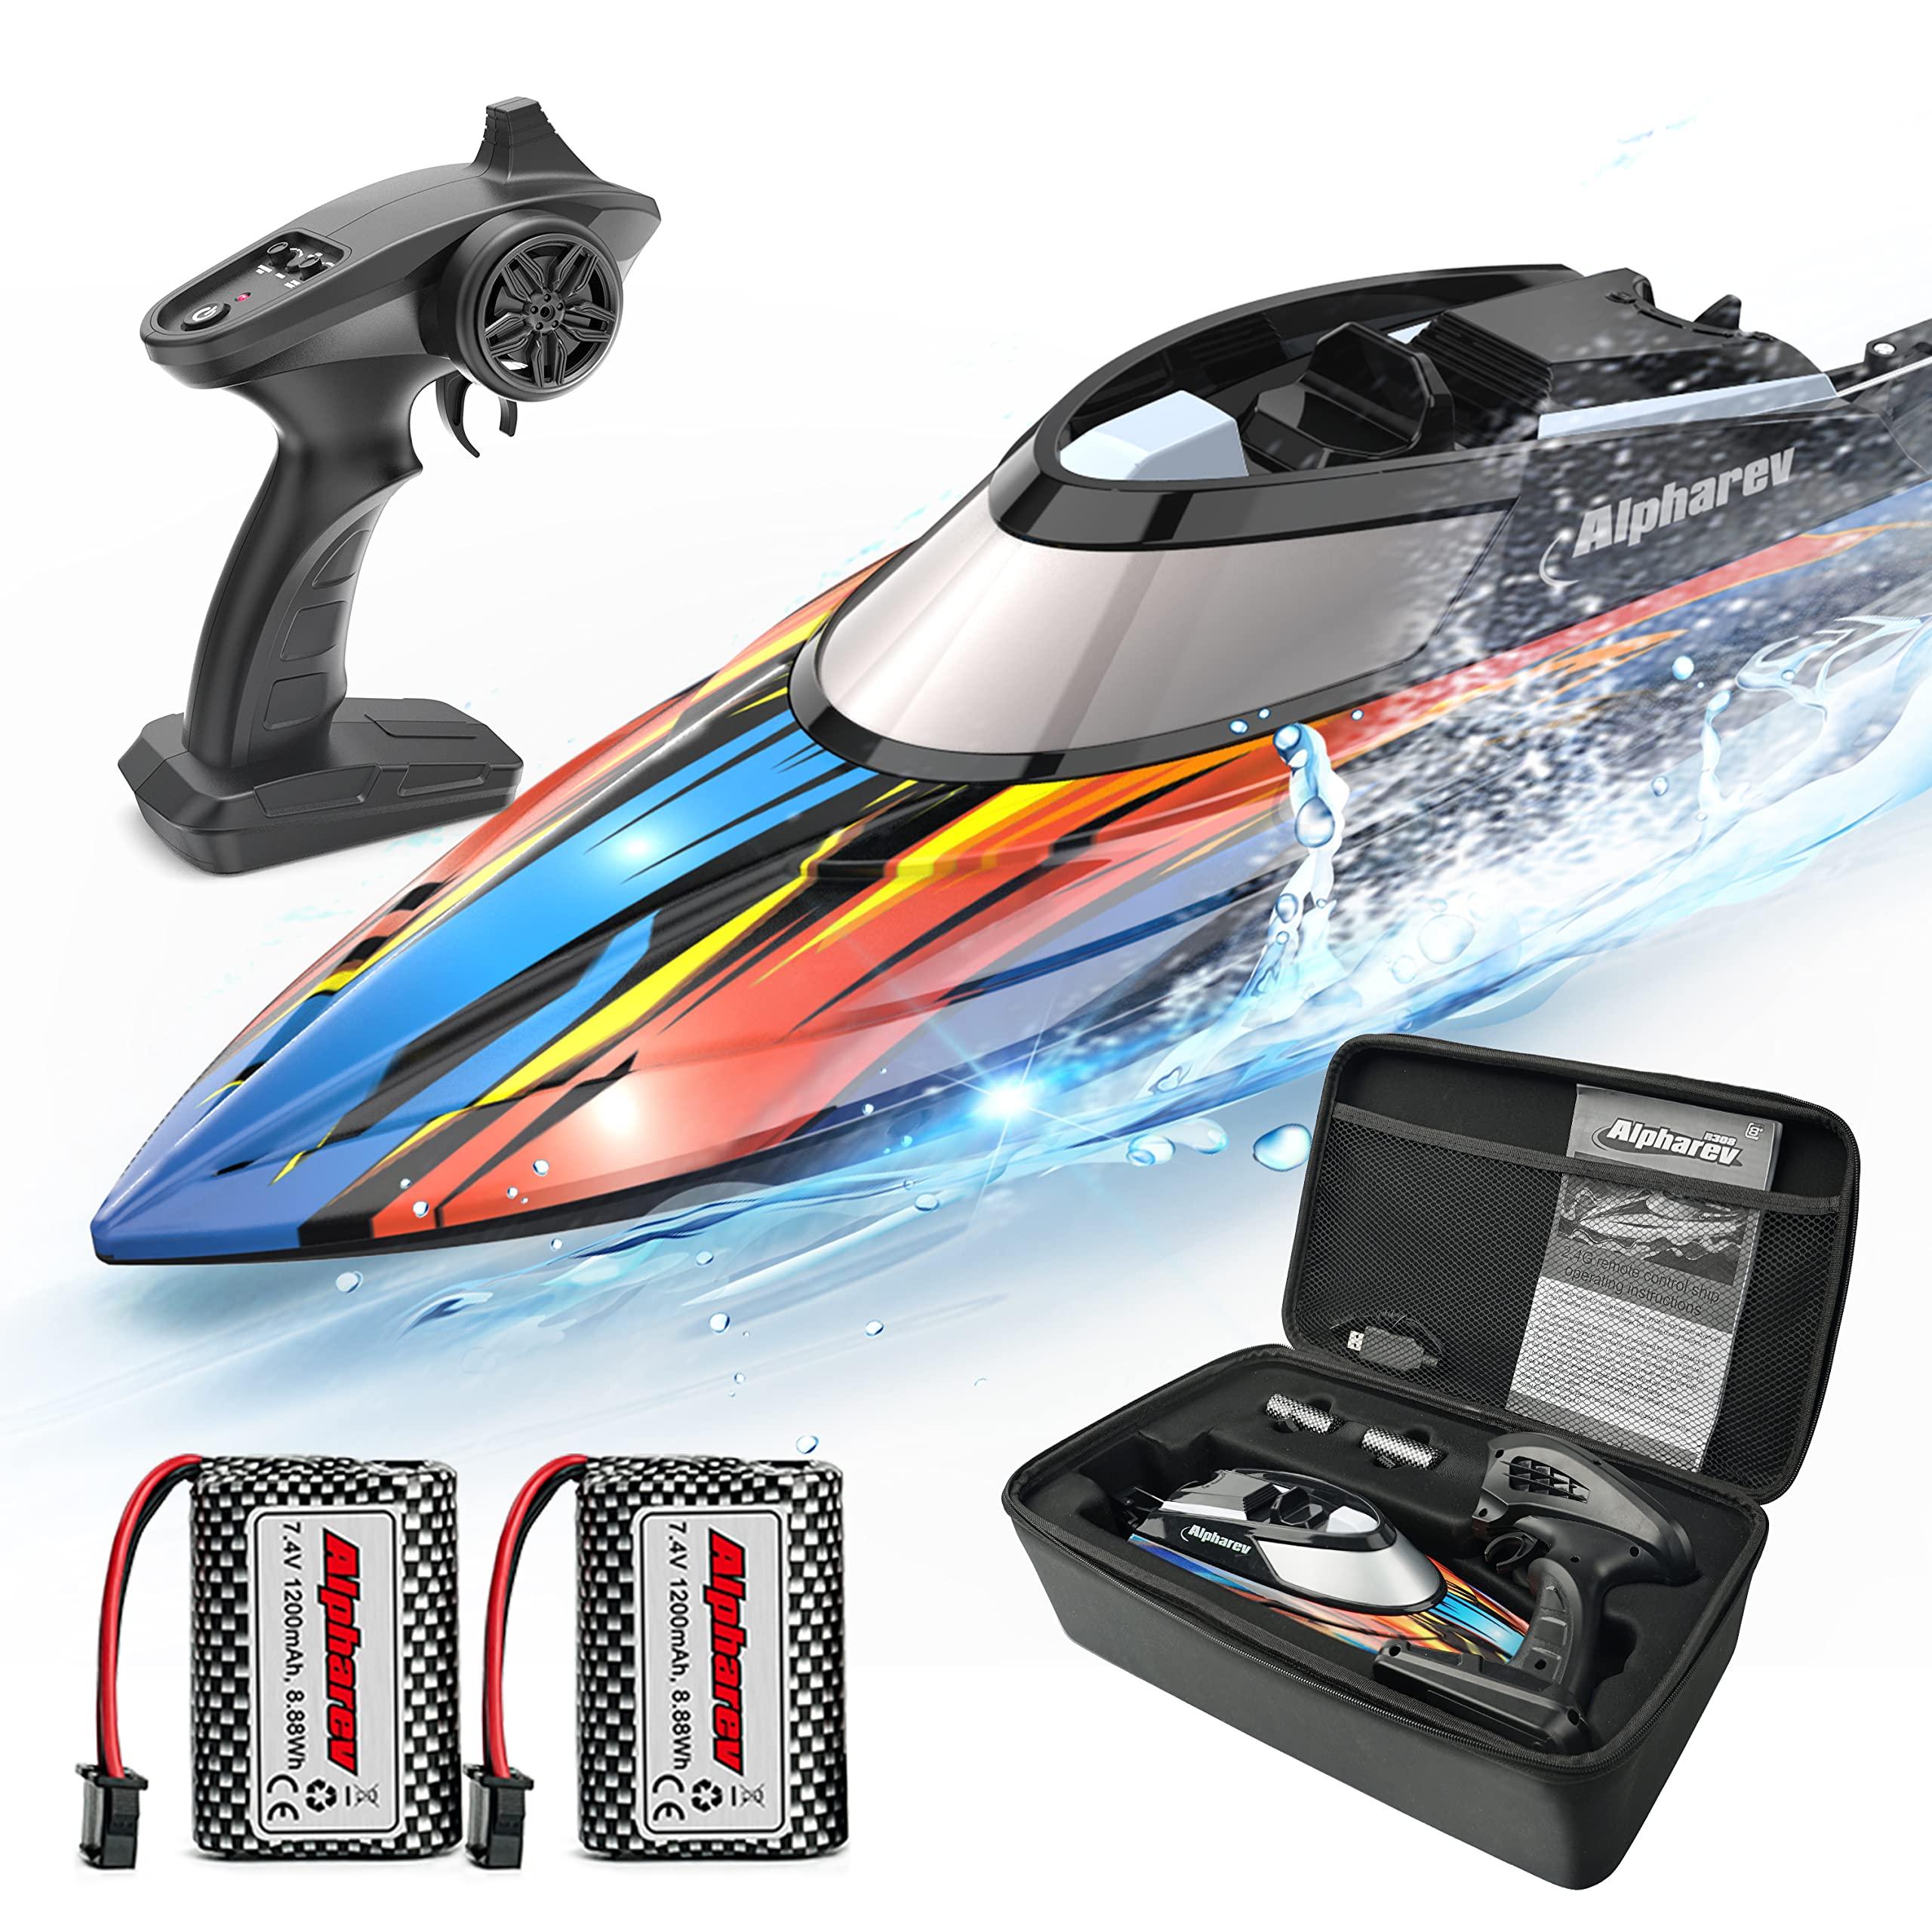 Remote Control Gadgets For Adults: Top Remote Control Boats for Adults